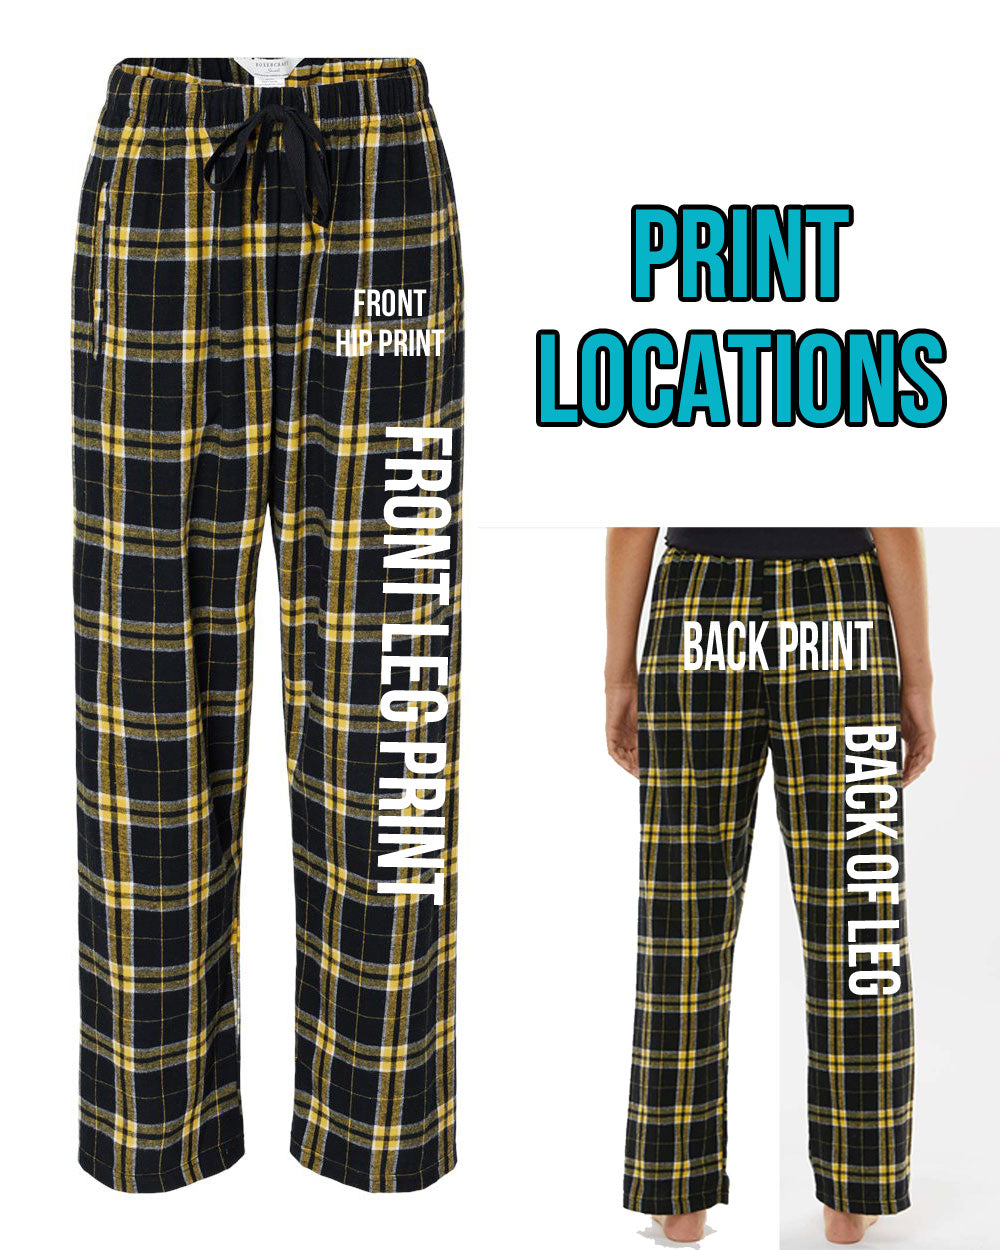 Boxercraft Unisex Flannel Pants Black and White Flannel Pants with Custom Text